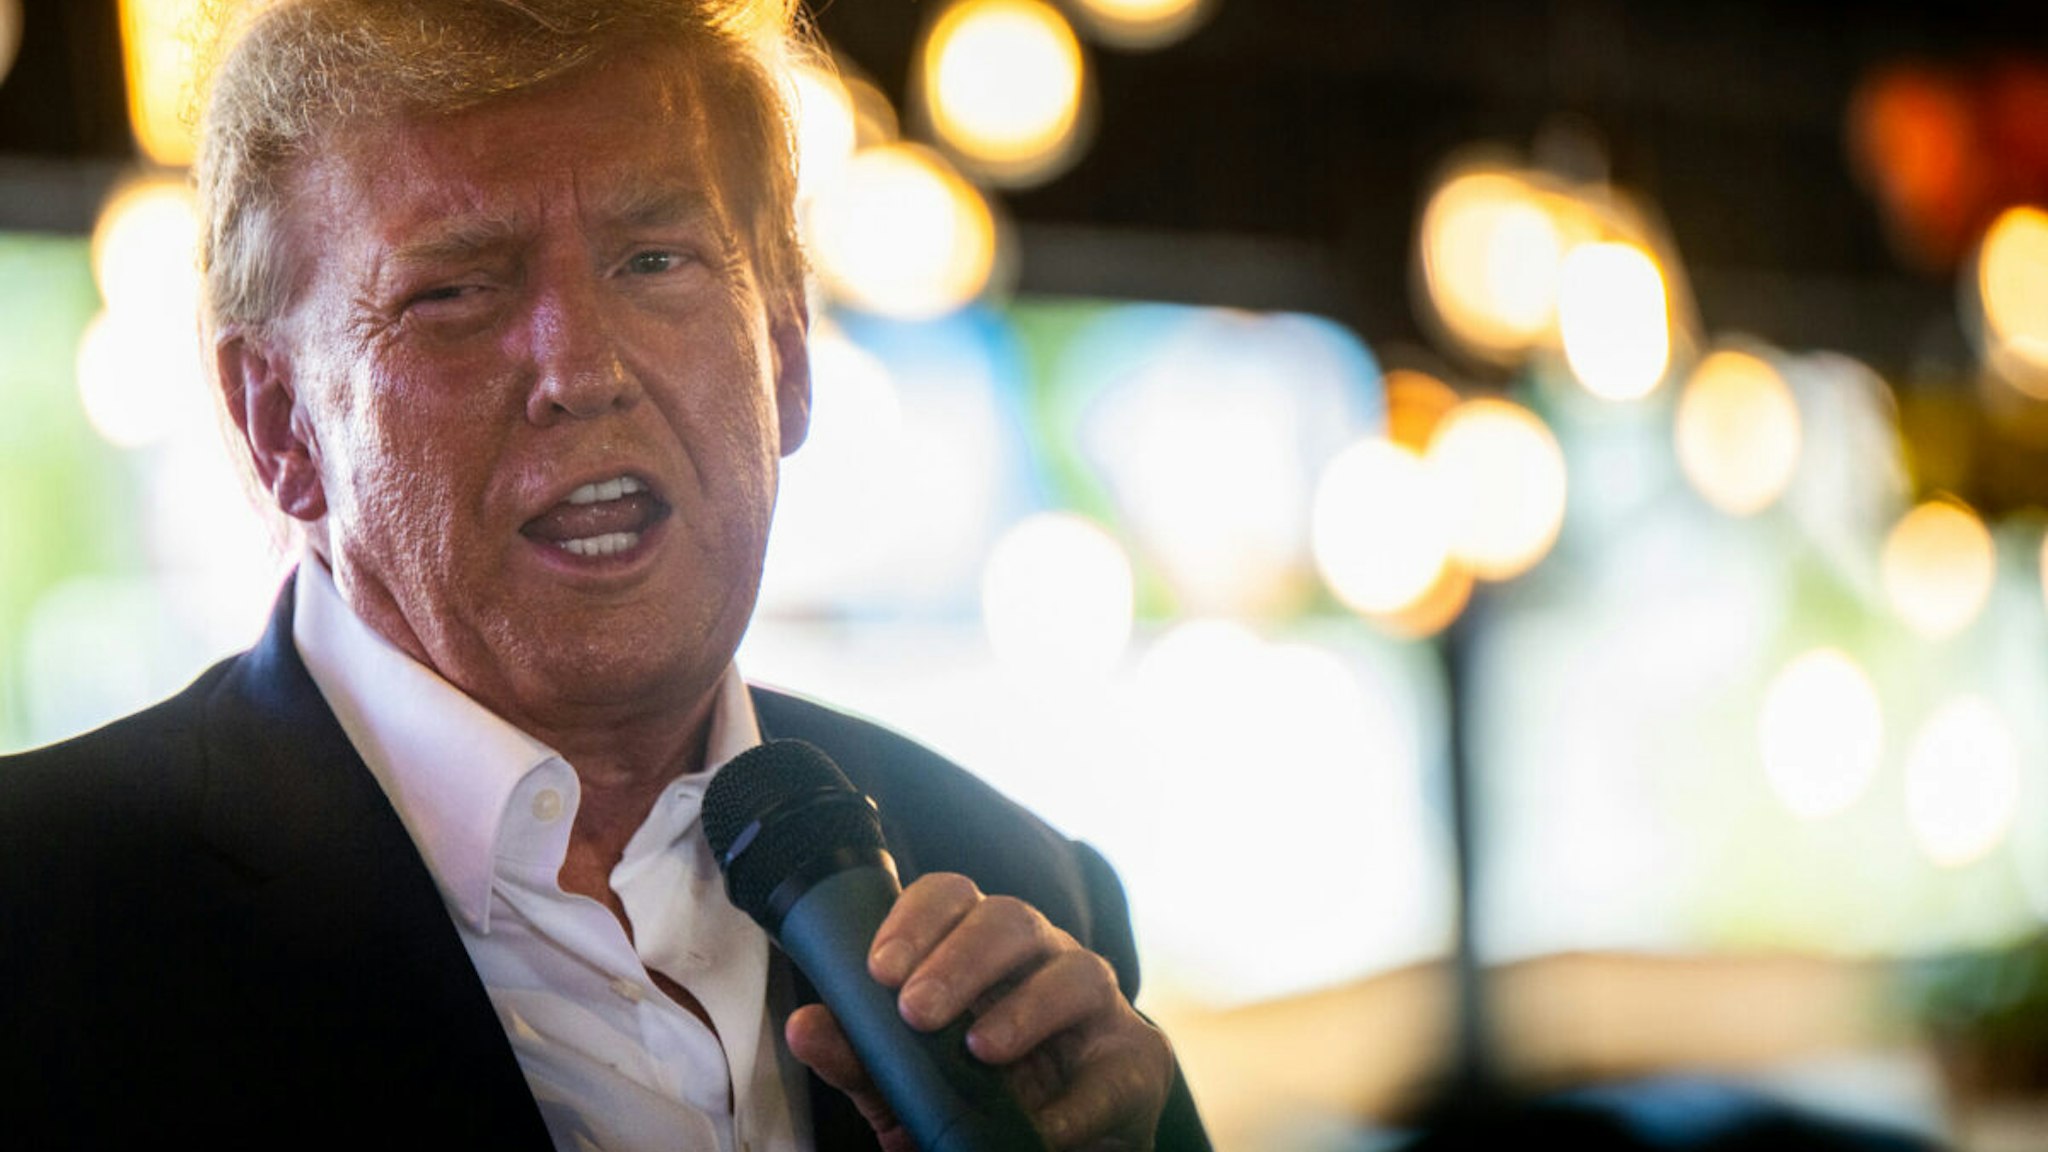 Republican presidential candidate and former U.S. President Donald Trump speaks during a rally at the Steer N' Stein bar at the Iowa State Fair on August 12, 2023 in Des Moines, Iowa. Republican and Democratic presidential hopefuls, including Florida Gov. Ron DeSantis, former President Donald Trump are visiting the fair, a tradition in one of the first states to hold caucuses in 2024.